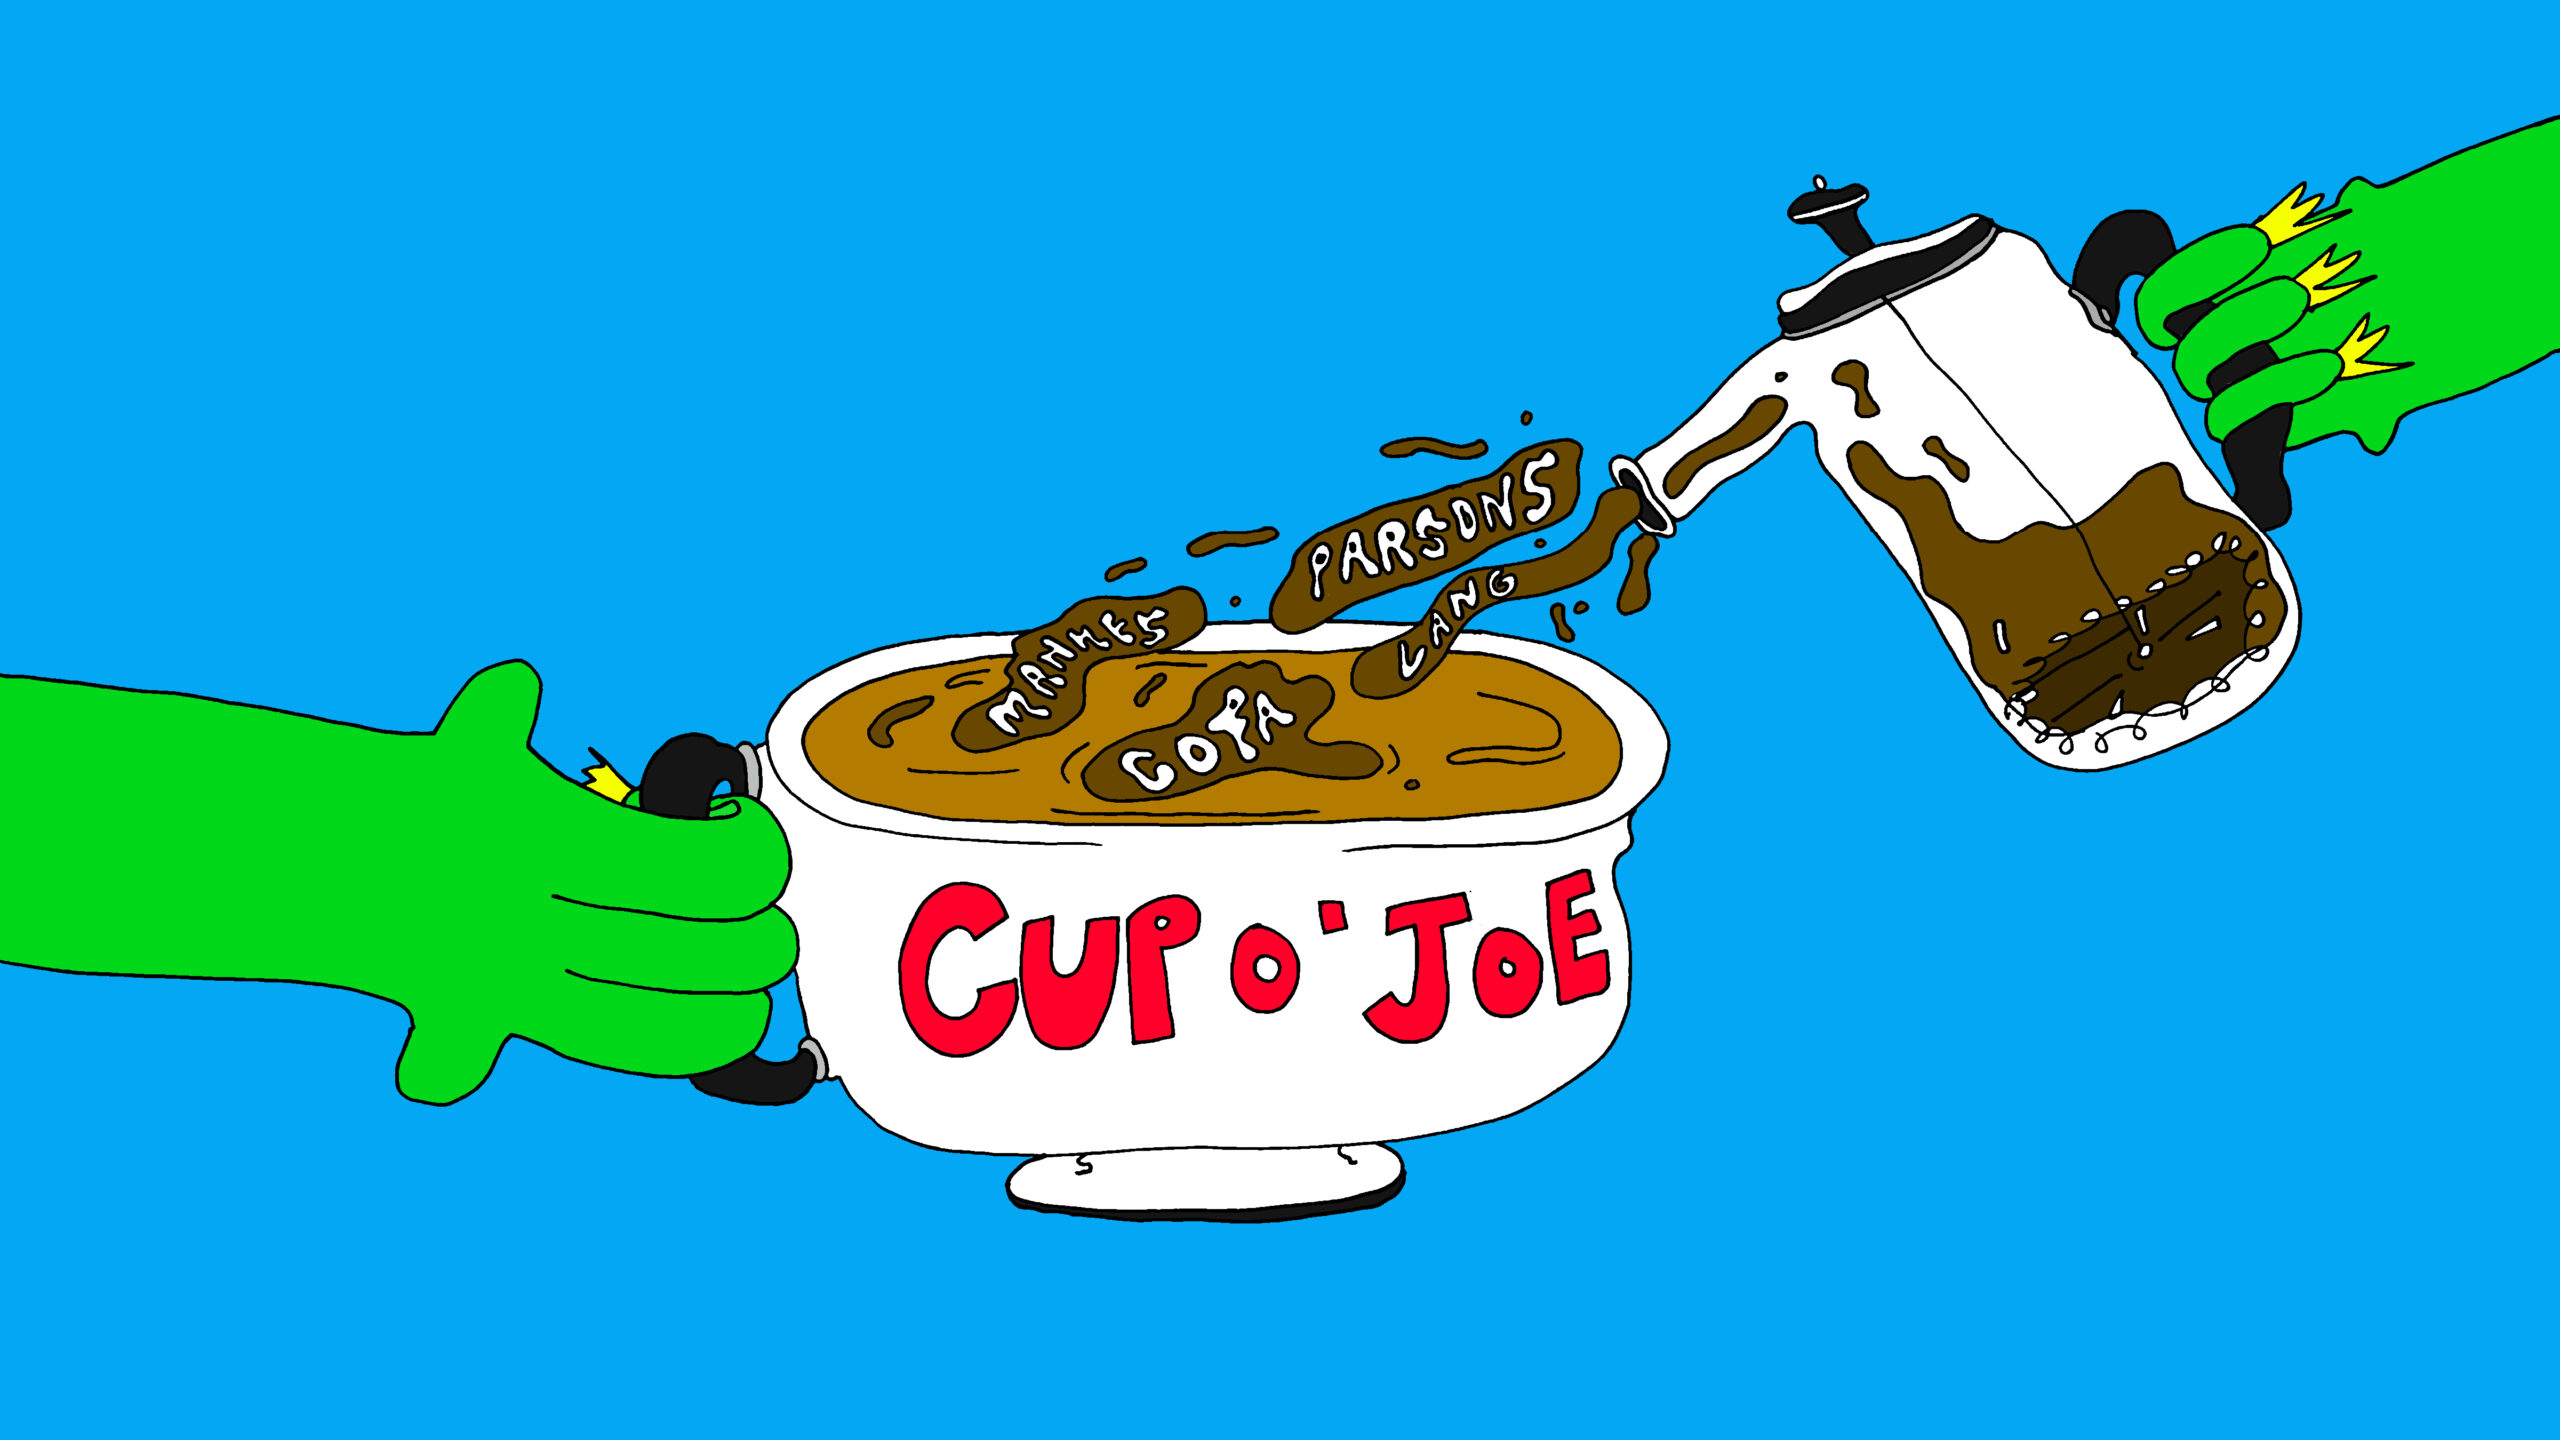 Drawing of a hand holding a cup of coffee while another hand pours coffee into the cup. The coffee splashes are of the different New School colleges.